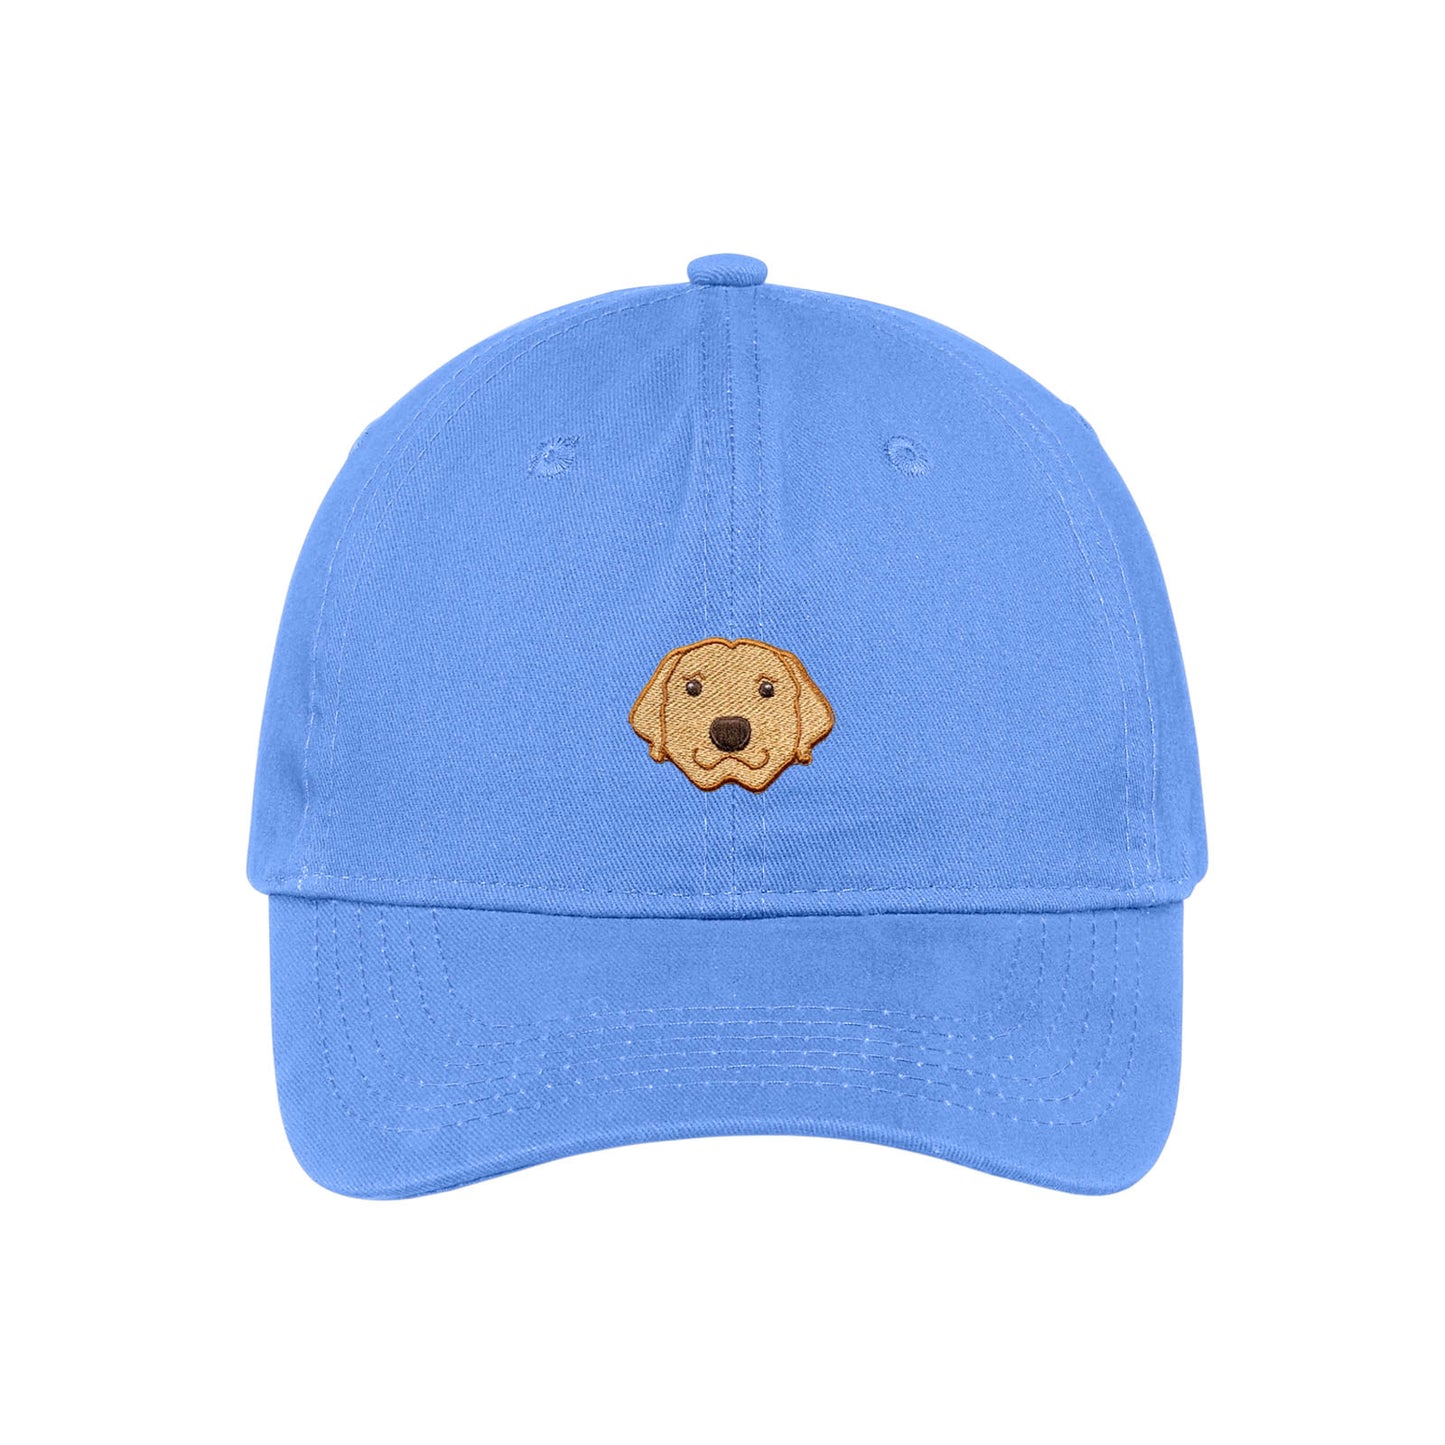 Carolina blue custom dog dad hats customized with your dog's face embroidered on the front.